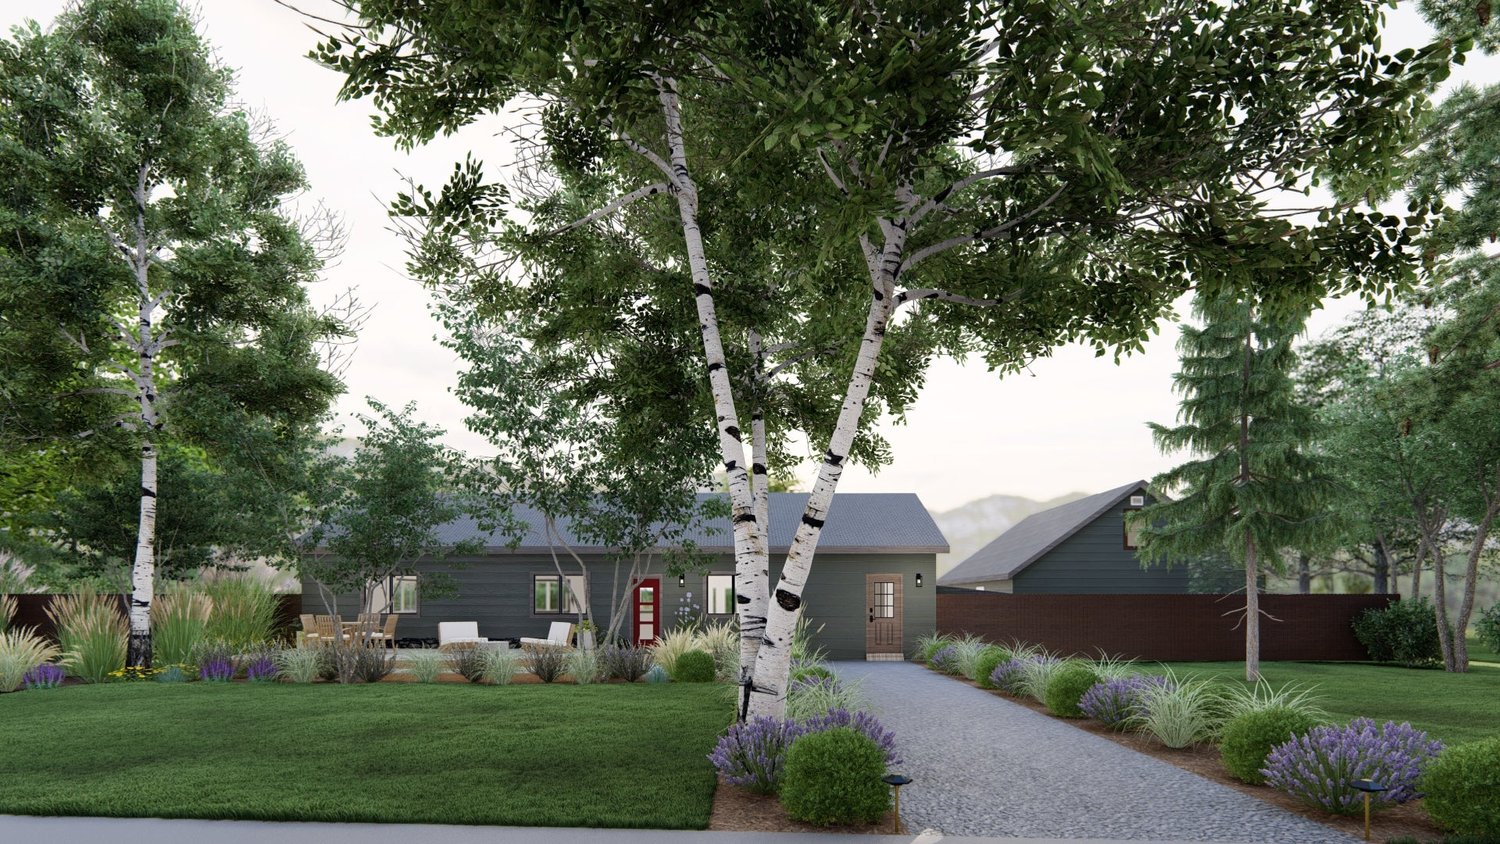 Cheyenne front yard design with trees and plants, and concrete pathway